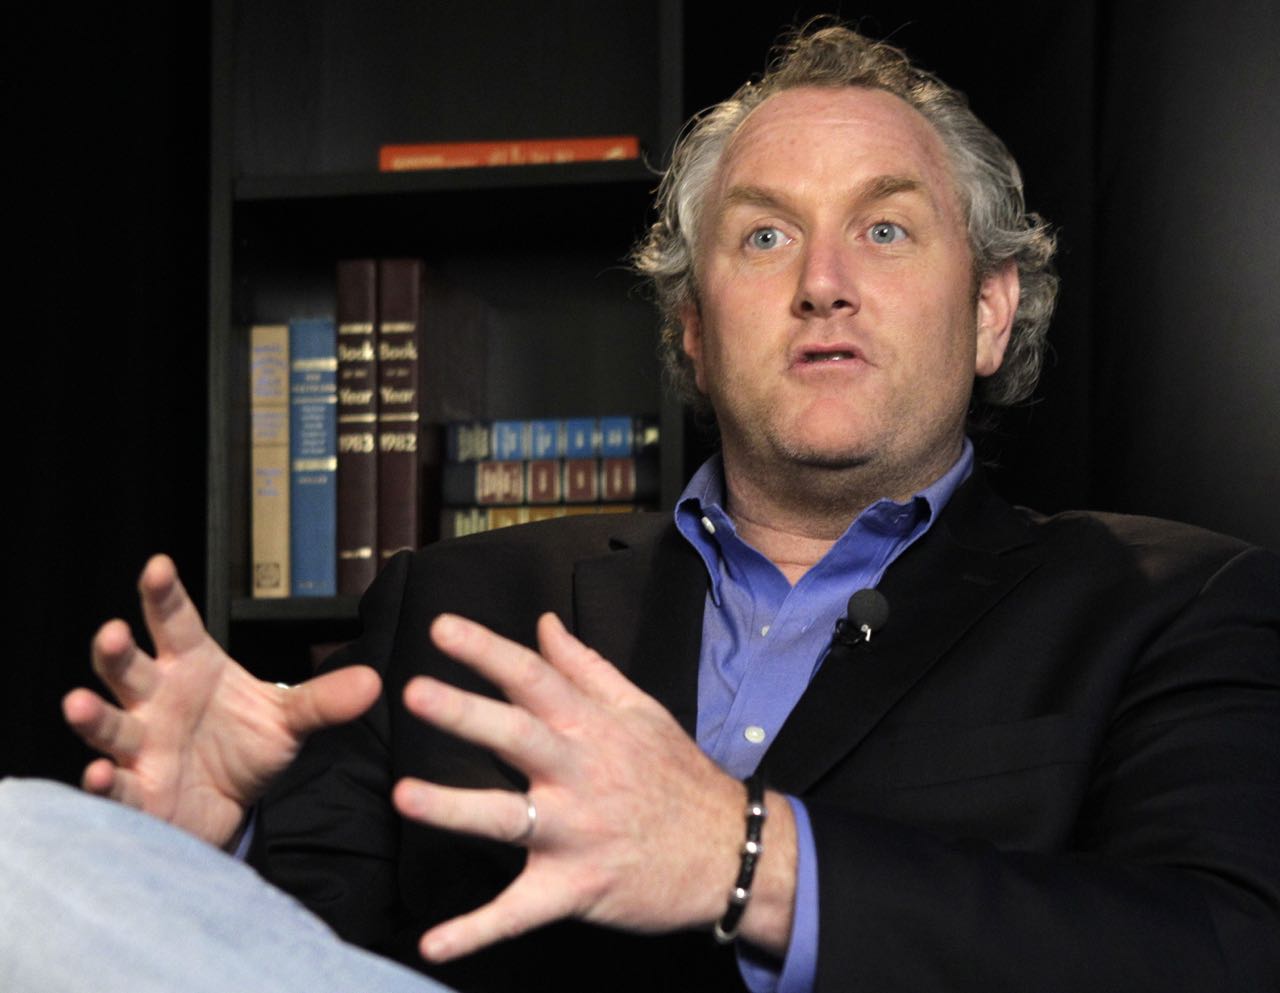 Conservative blogger Andrew Breitbart, the namesake of Breitbart News Network, gestures as he speaks during an interview at the Associated Press in New York, Tuesday, June 7, 2011. (AP Photo/Kathy Willens)